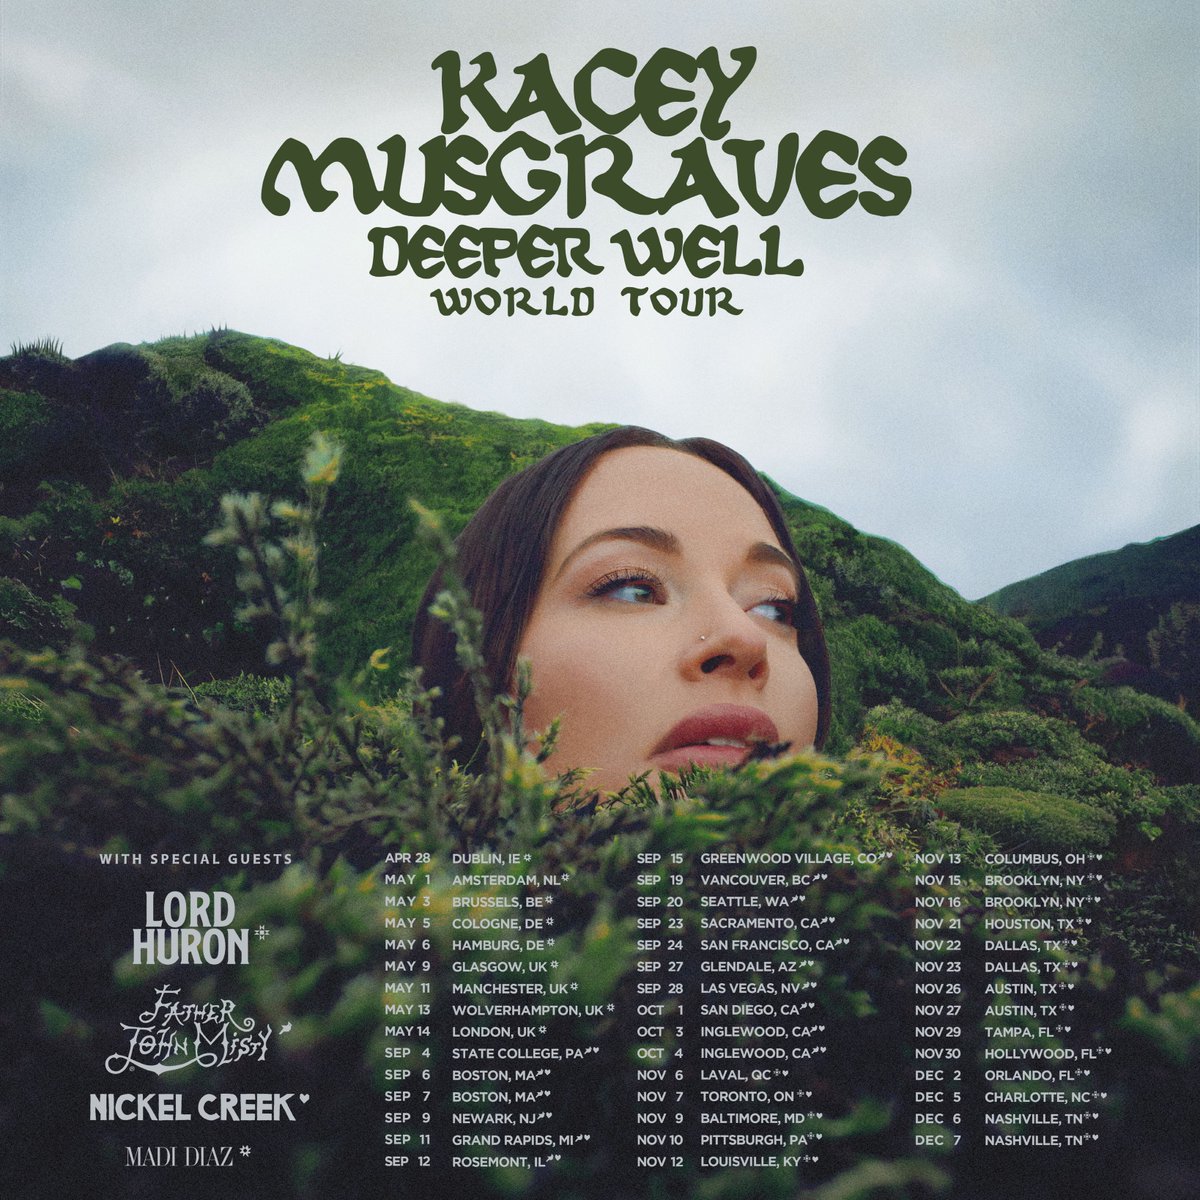 We’ll be joining @KaceyMusgraves on the fall leg of her 𝓓𝓮𝓮𝓹𝓮𝓻 𝓦𝓮𝓵𝓵 World Tour!!! 🌱 See all the details and sign up for access to the Nickel Creek pre-sale at nickelcreek.com. General on-sale begins Friday, March 8.